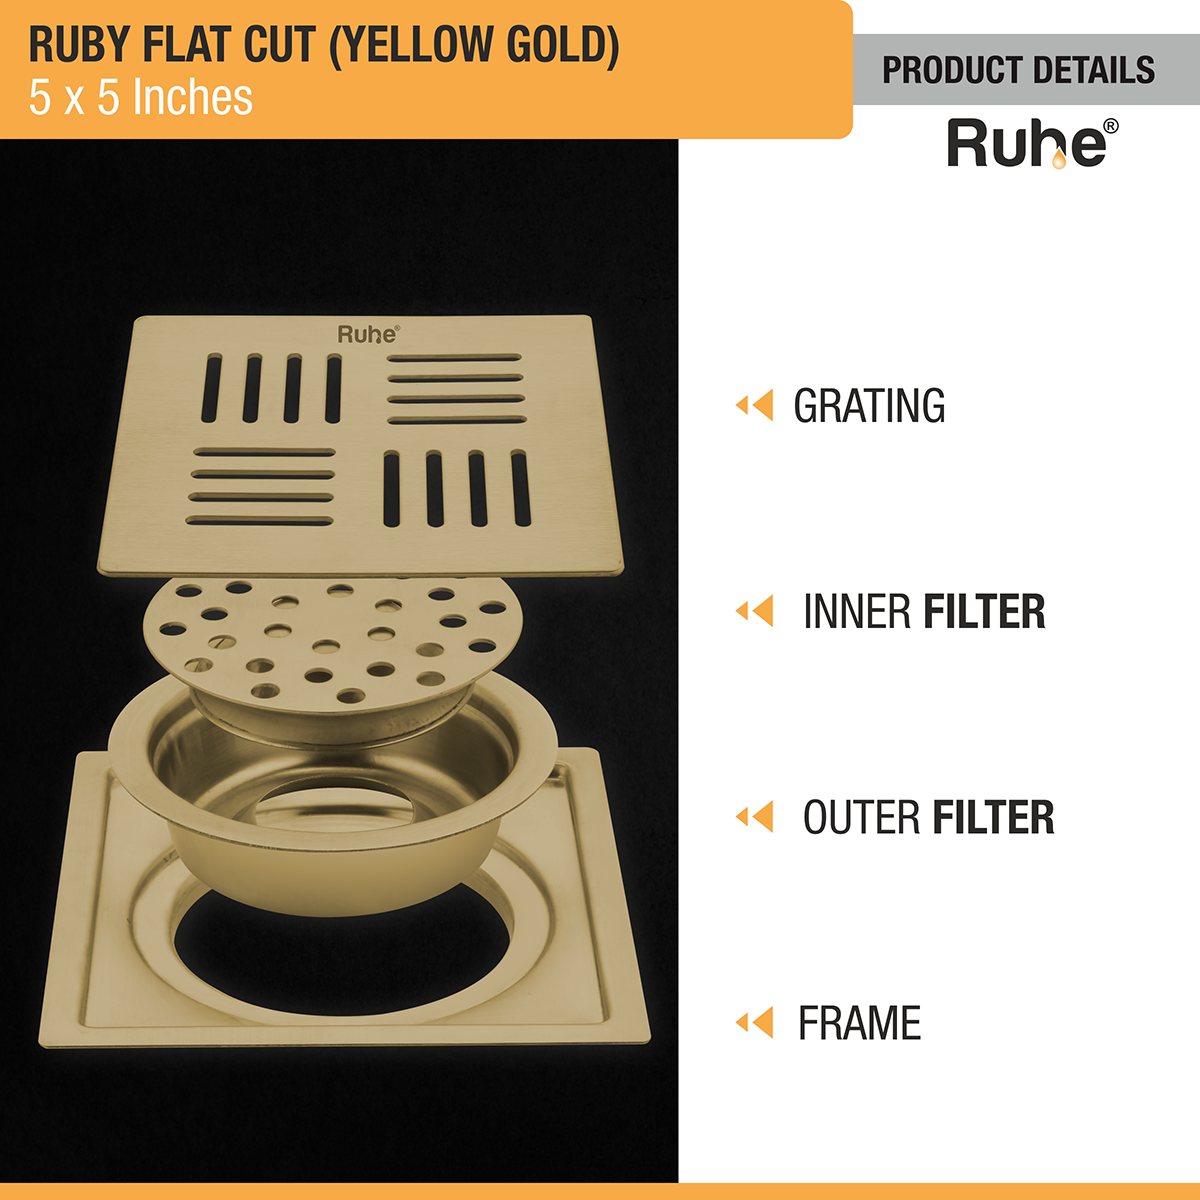 Ruby Square Flat Cut Floor Drain in Yellow Gold PVD Coating (5 x 5 Inches) product details